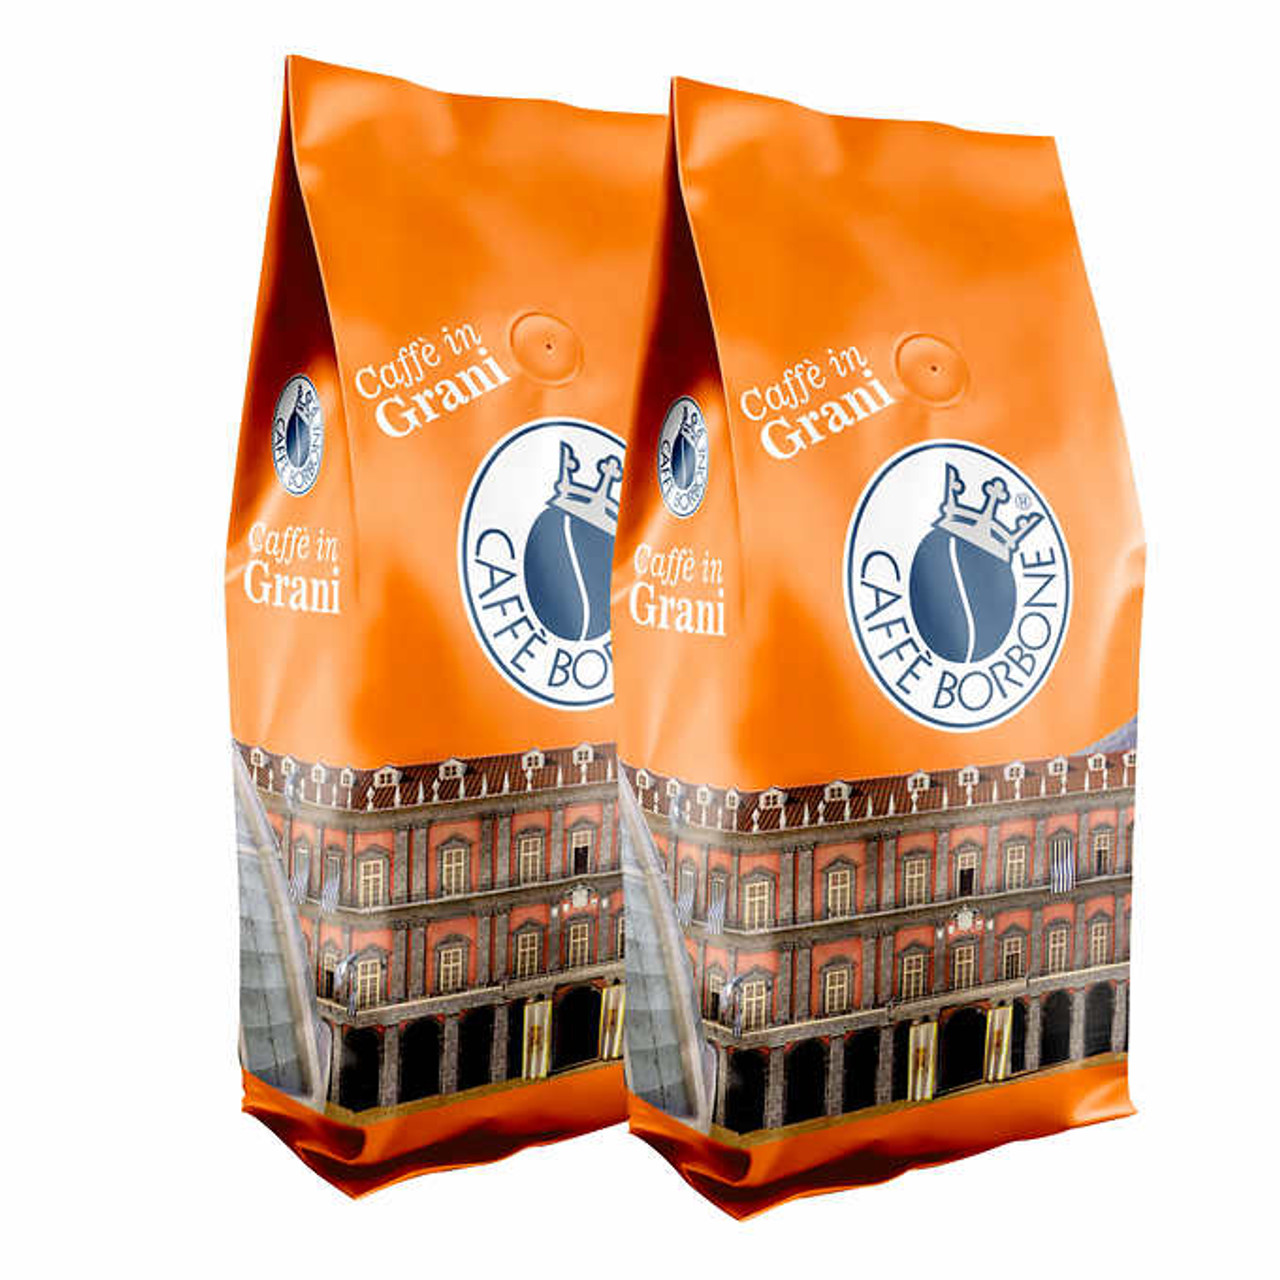 Caffe Borbone Palazzo Nobile Whole Coffee Beans - 2 x 1 kg - Exquisite Italian Coffee Elegance- Chicken Pieces